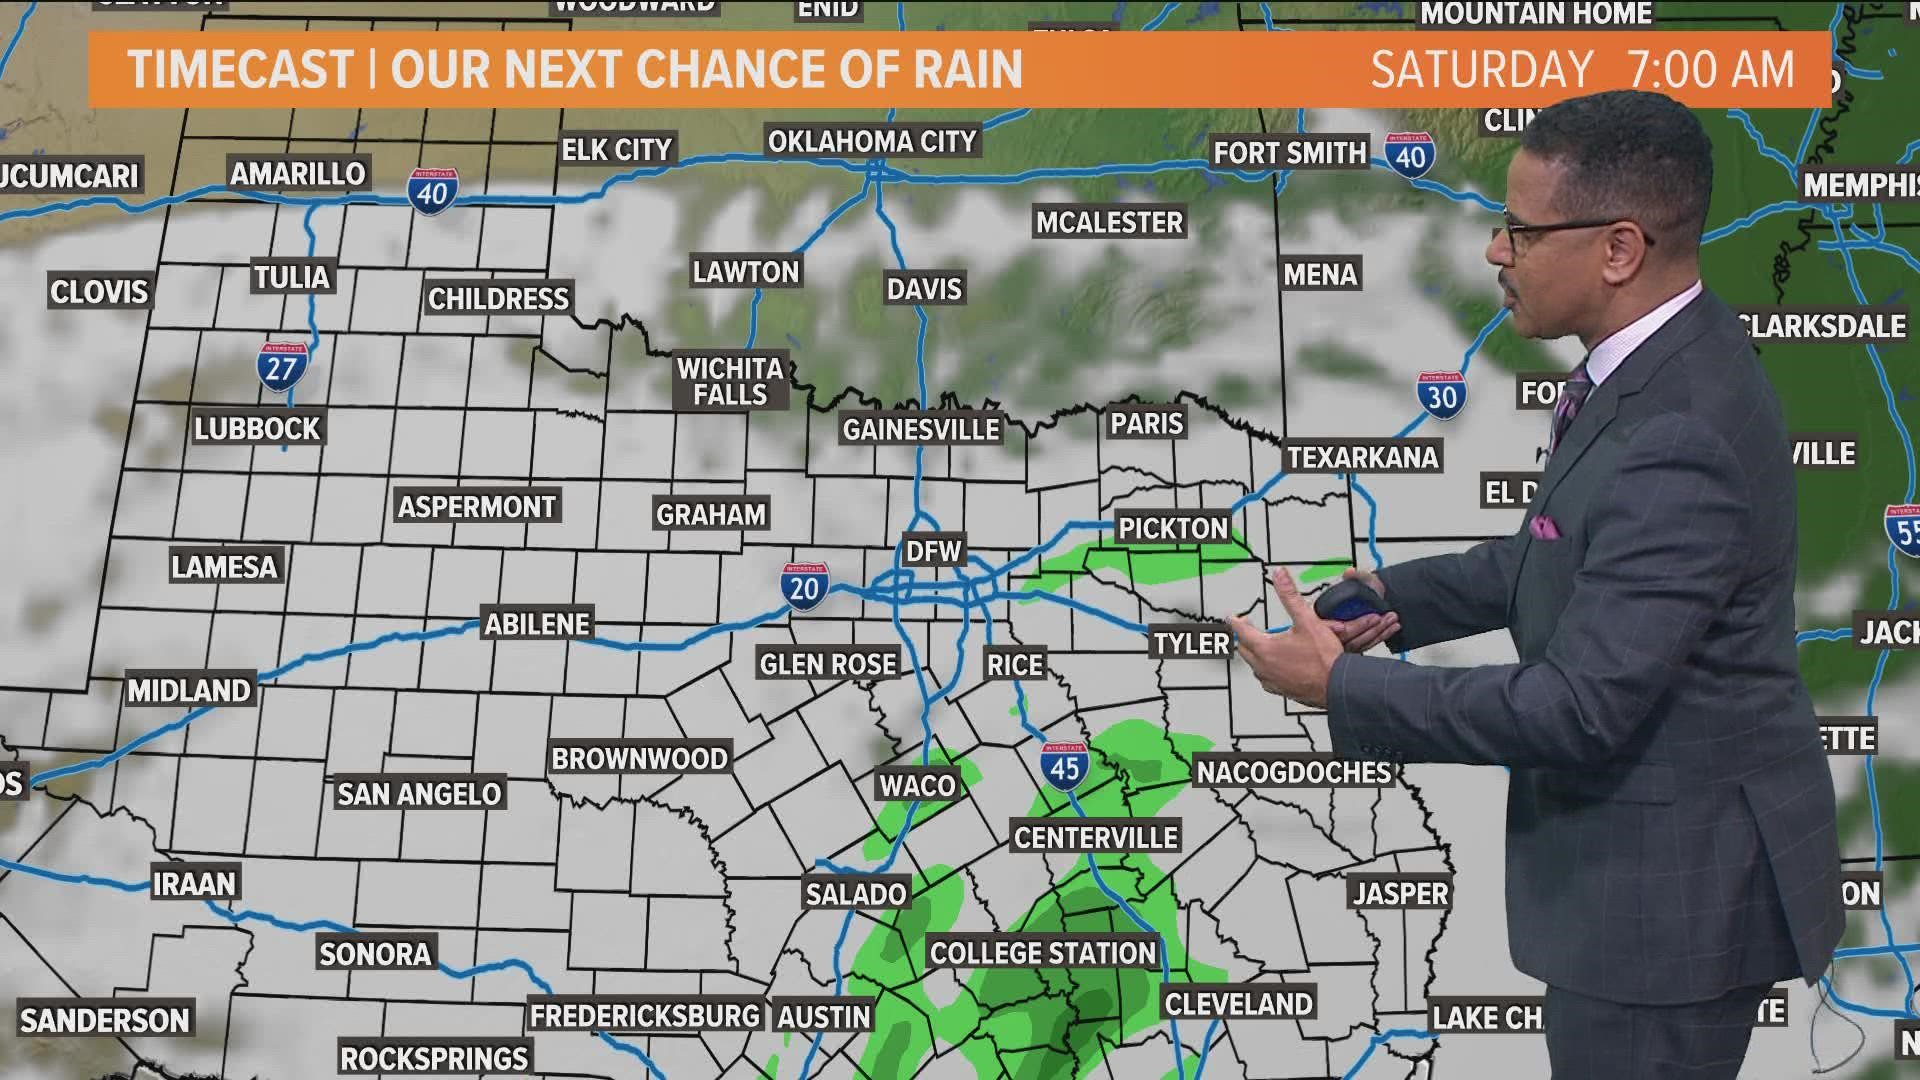 We're tracking our next round of rain expected this weekend.